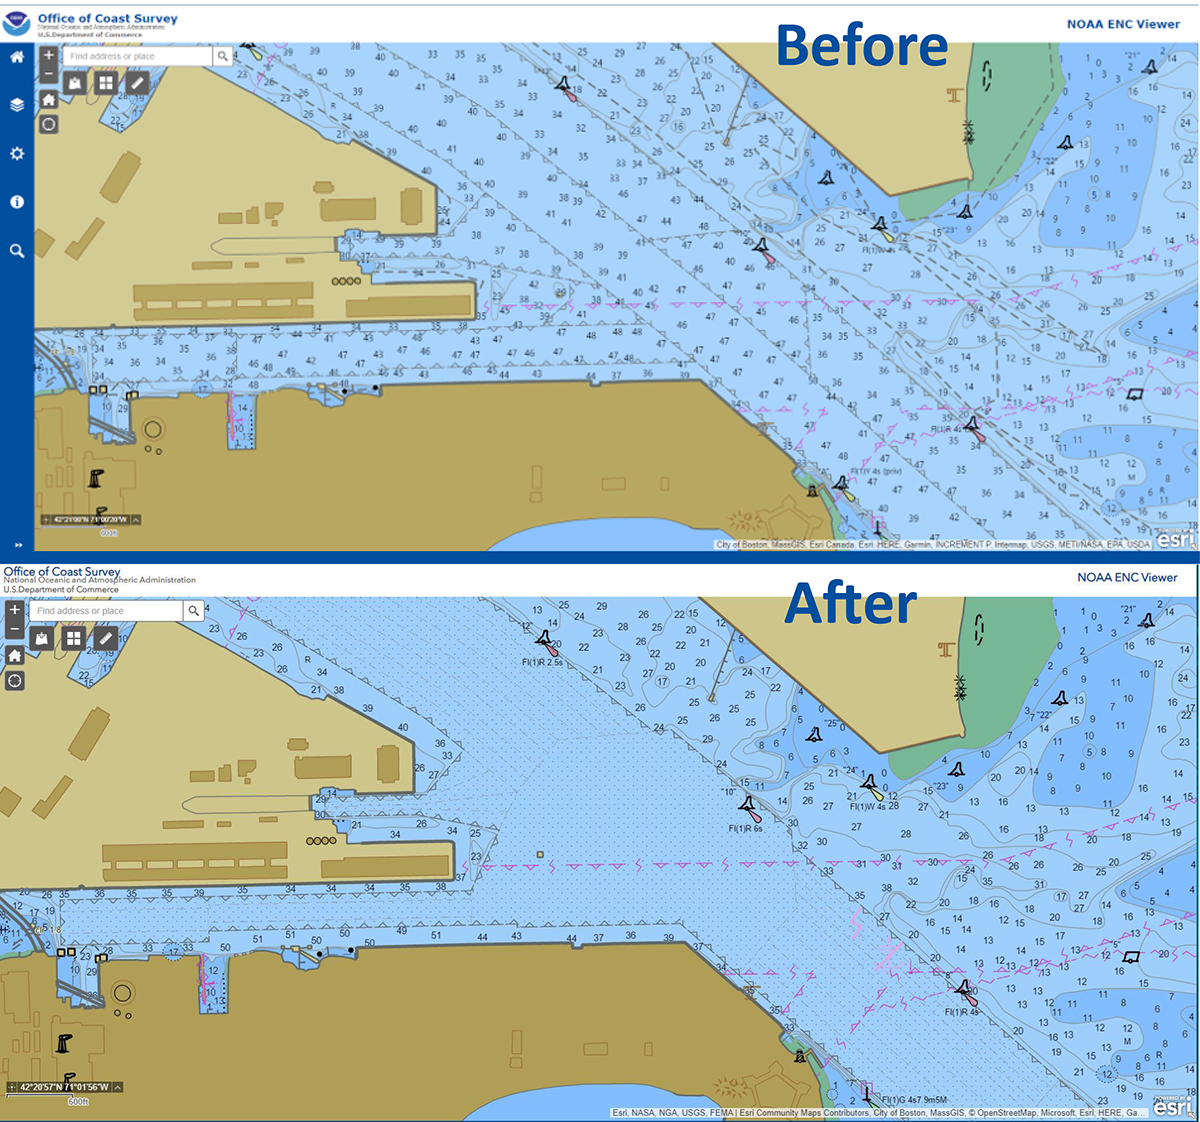 An image of two ENC's, both showing areas around Boston's Reserved Channel. The top image shows the channel with open hydrography and the bottom image shows dredged areas divided into reaches and quarters with associated controlling depths.